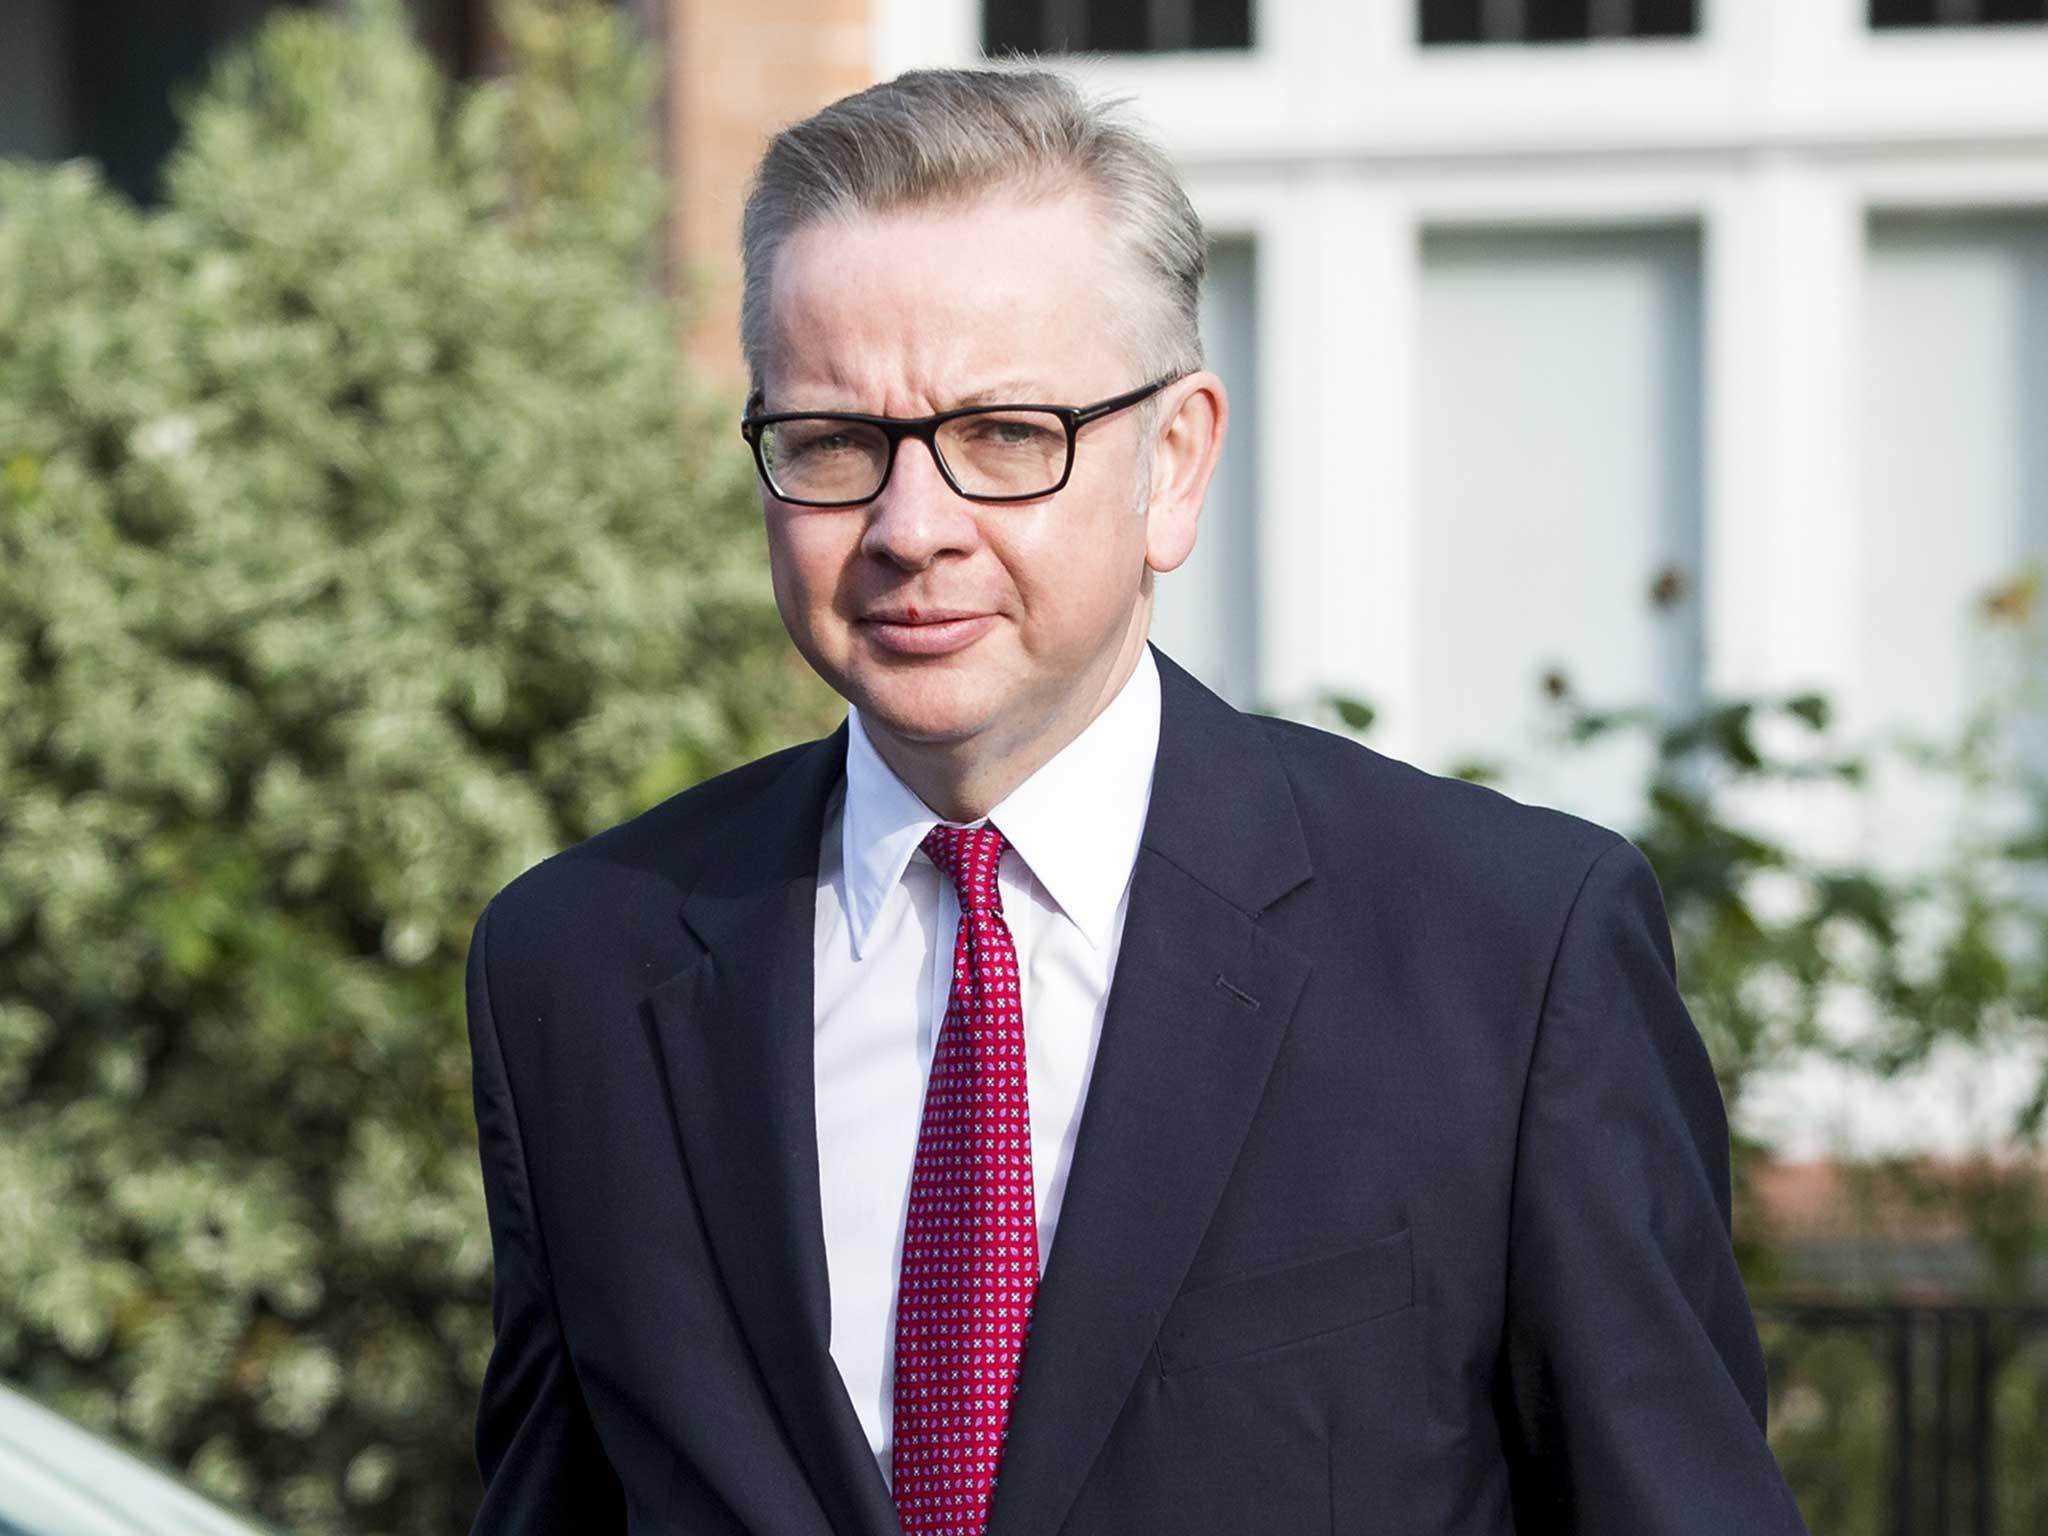 Michael Gove announced his intention to run to be the next Conservative Party leader and UK prime minister